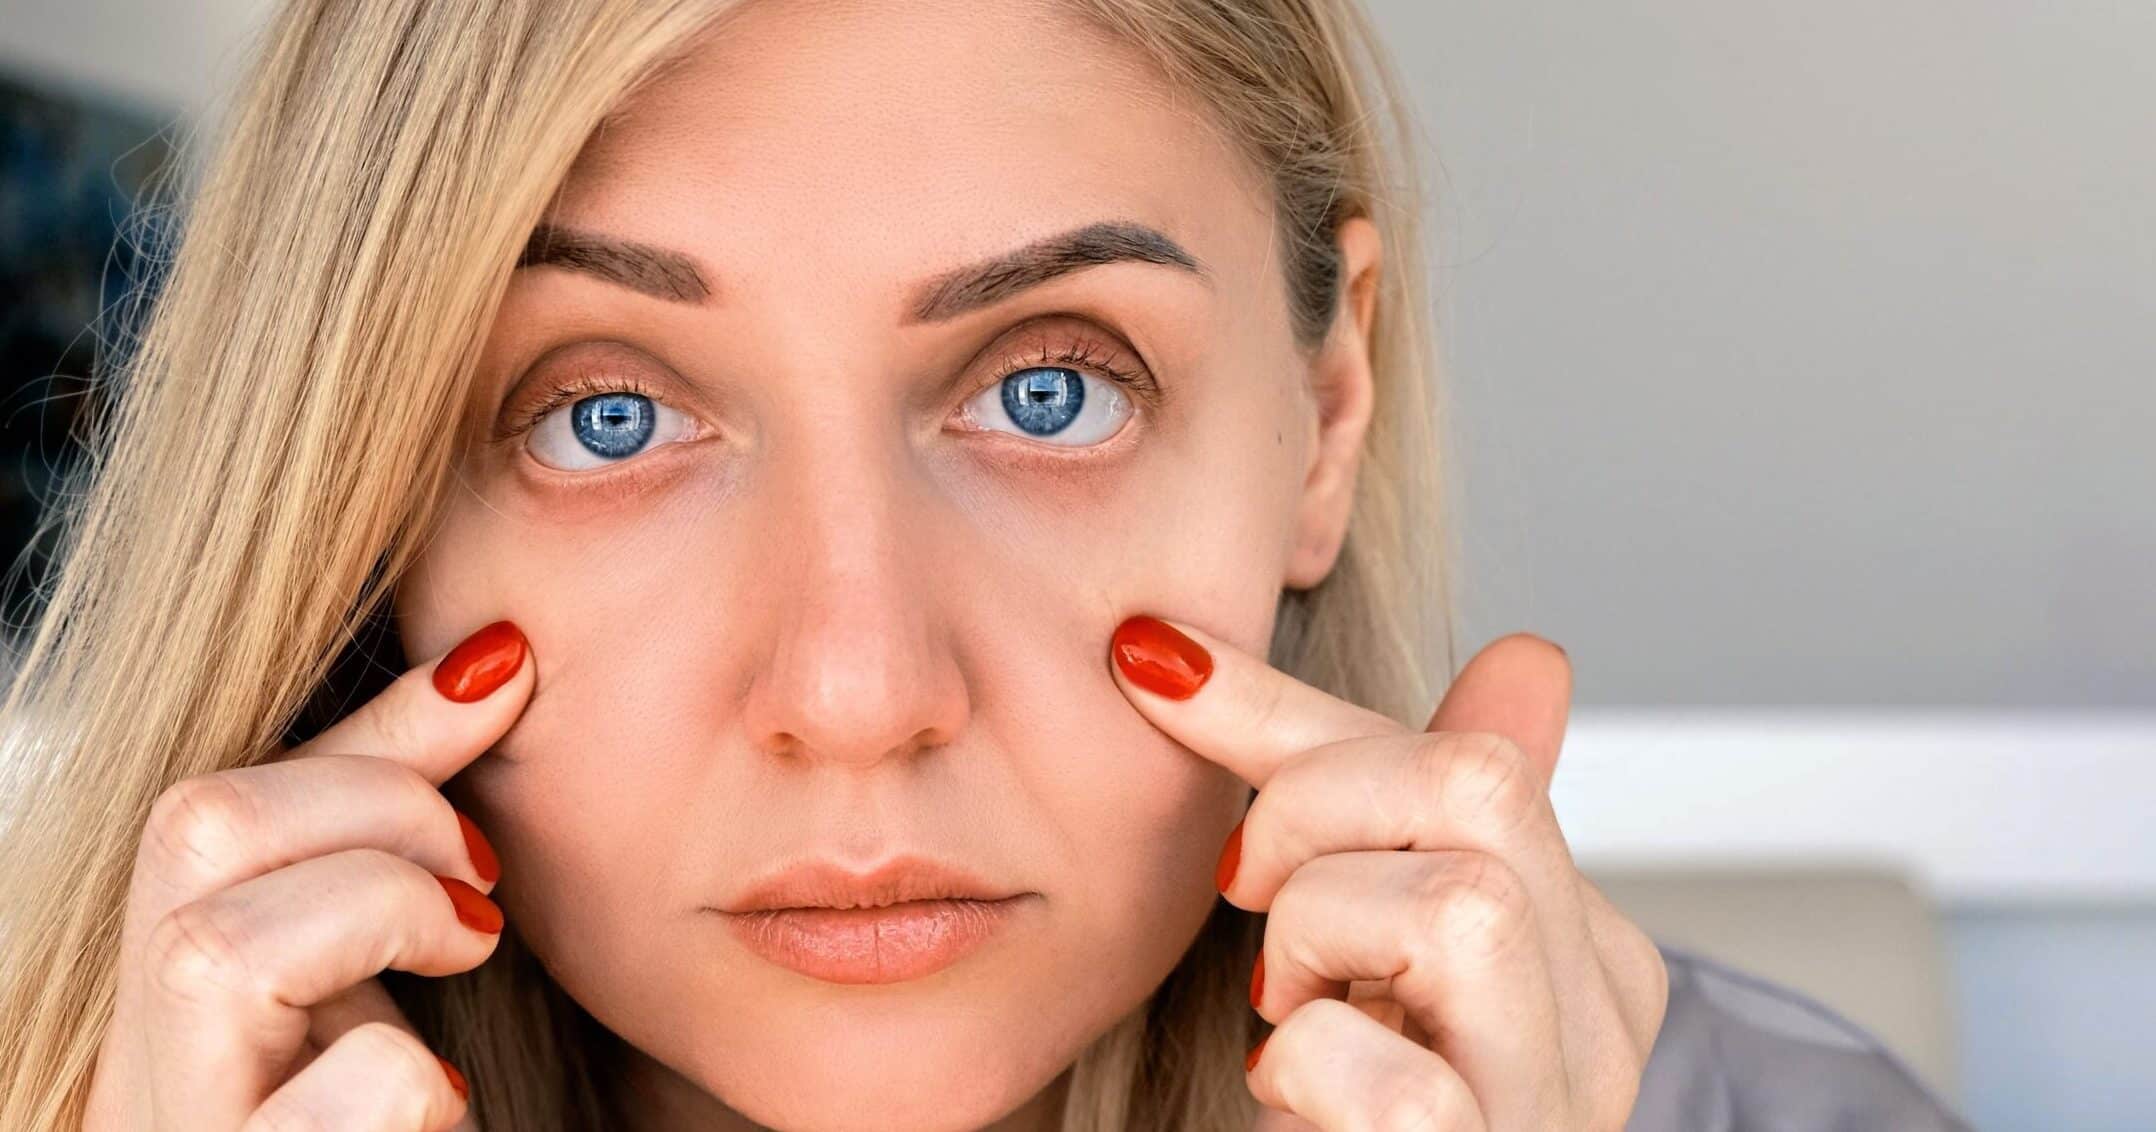 Dark Circles and Eye Bags - Why they occur and Holistic remedies